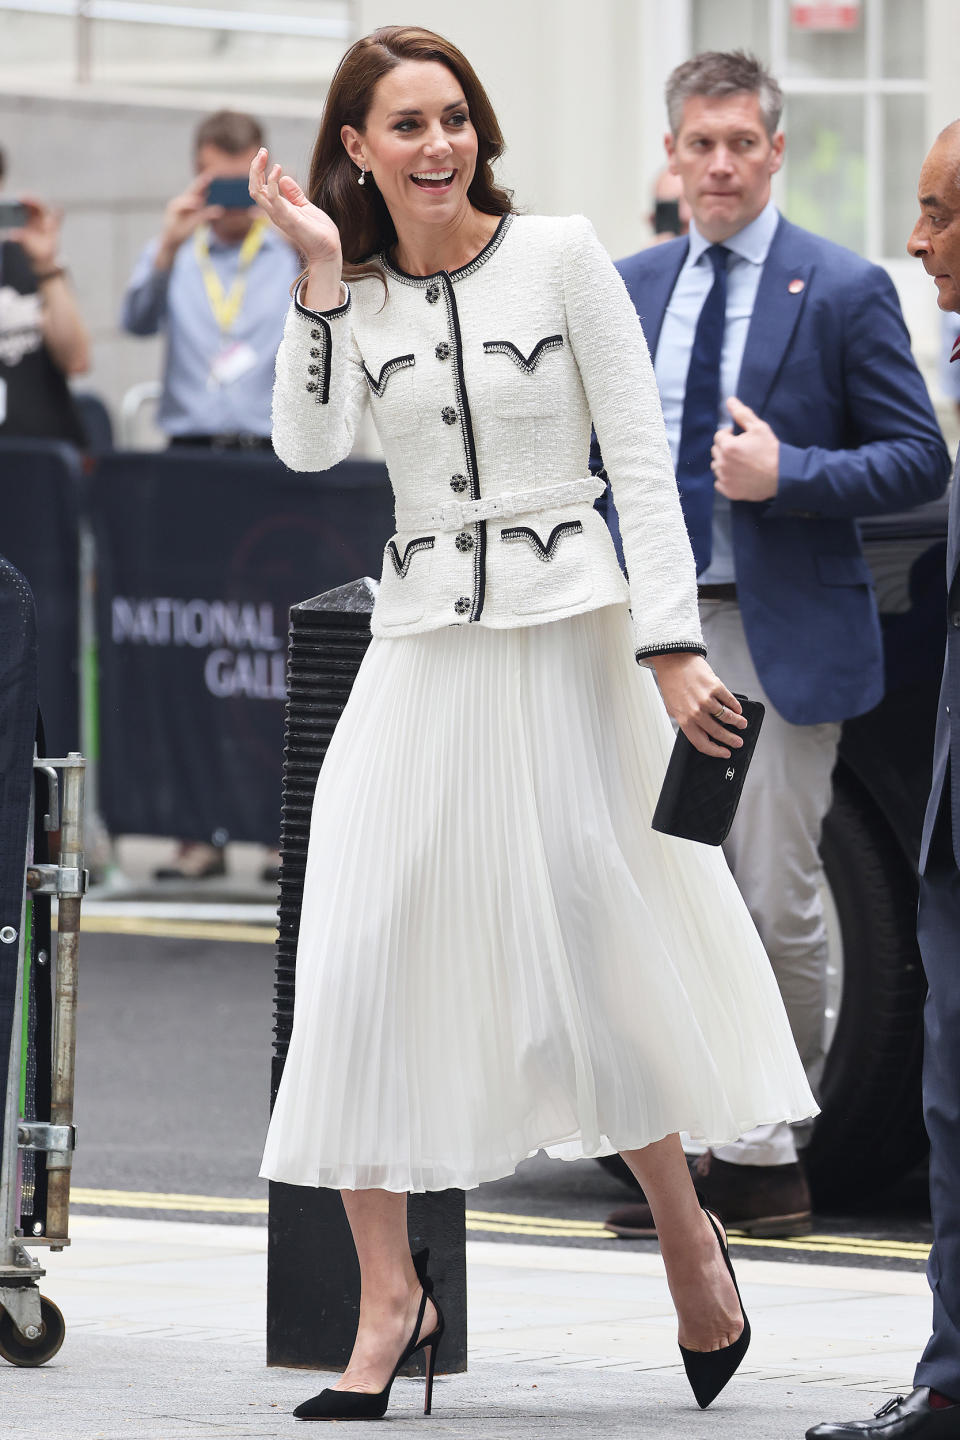 Catherine, Princess of Wales arrives at the reopening of the National Portrait Gallery on June 20, 2023 in London, England. (Neil Mockford / GC Images)